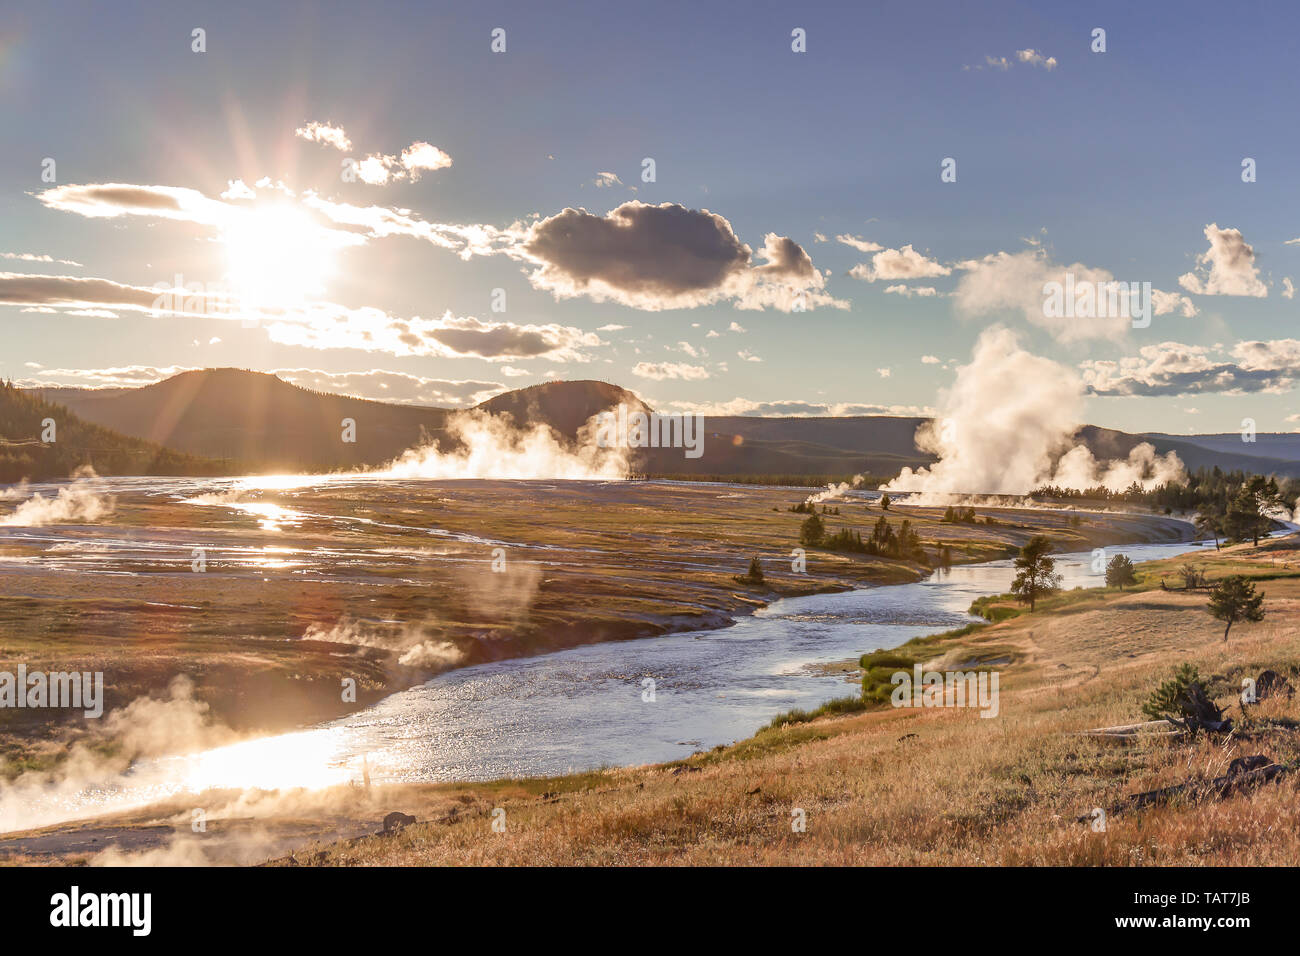 Late evening view of steam rising from the many hot springs of Midway Geyser Basin in Yellowstone National Park, Wyoming, USA. Stock Photo